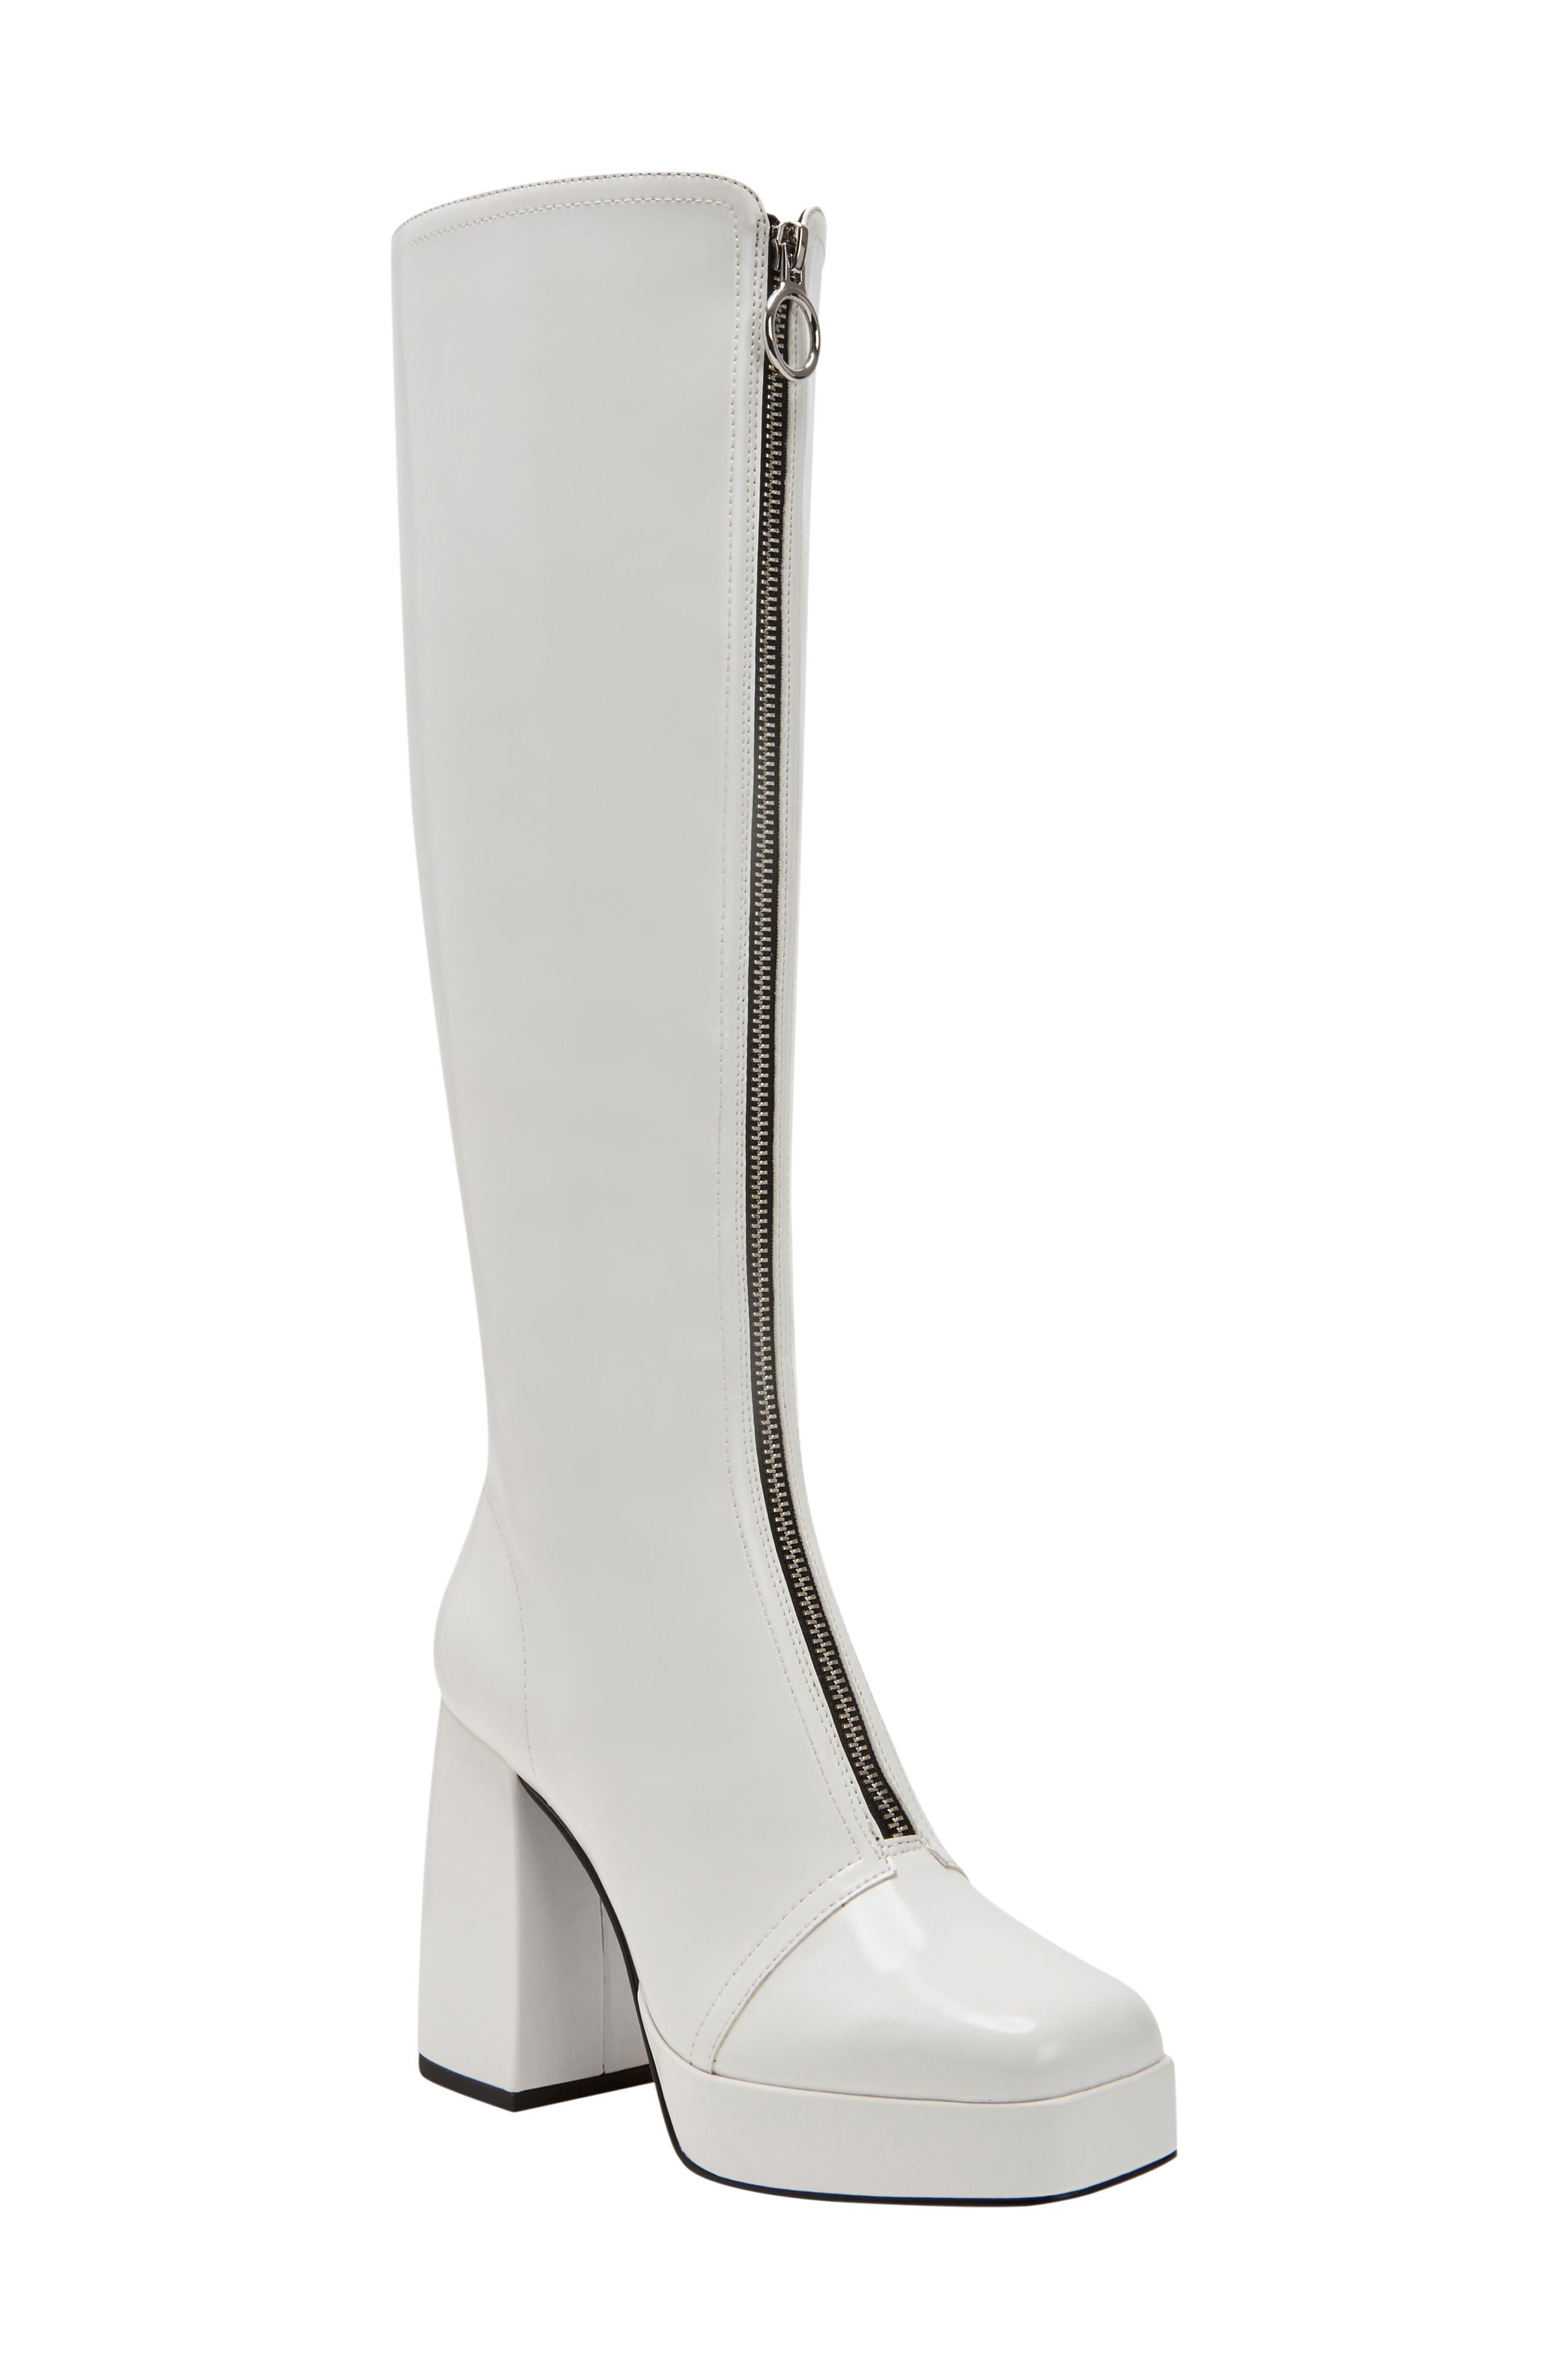 Katy Perry The Uplift Knee High Boot in White | Lyst